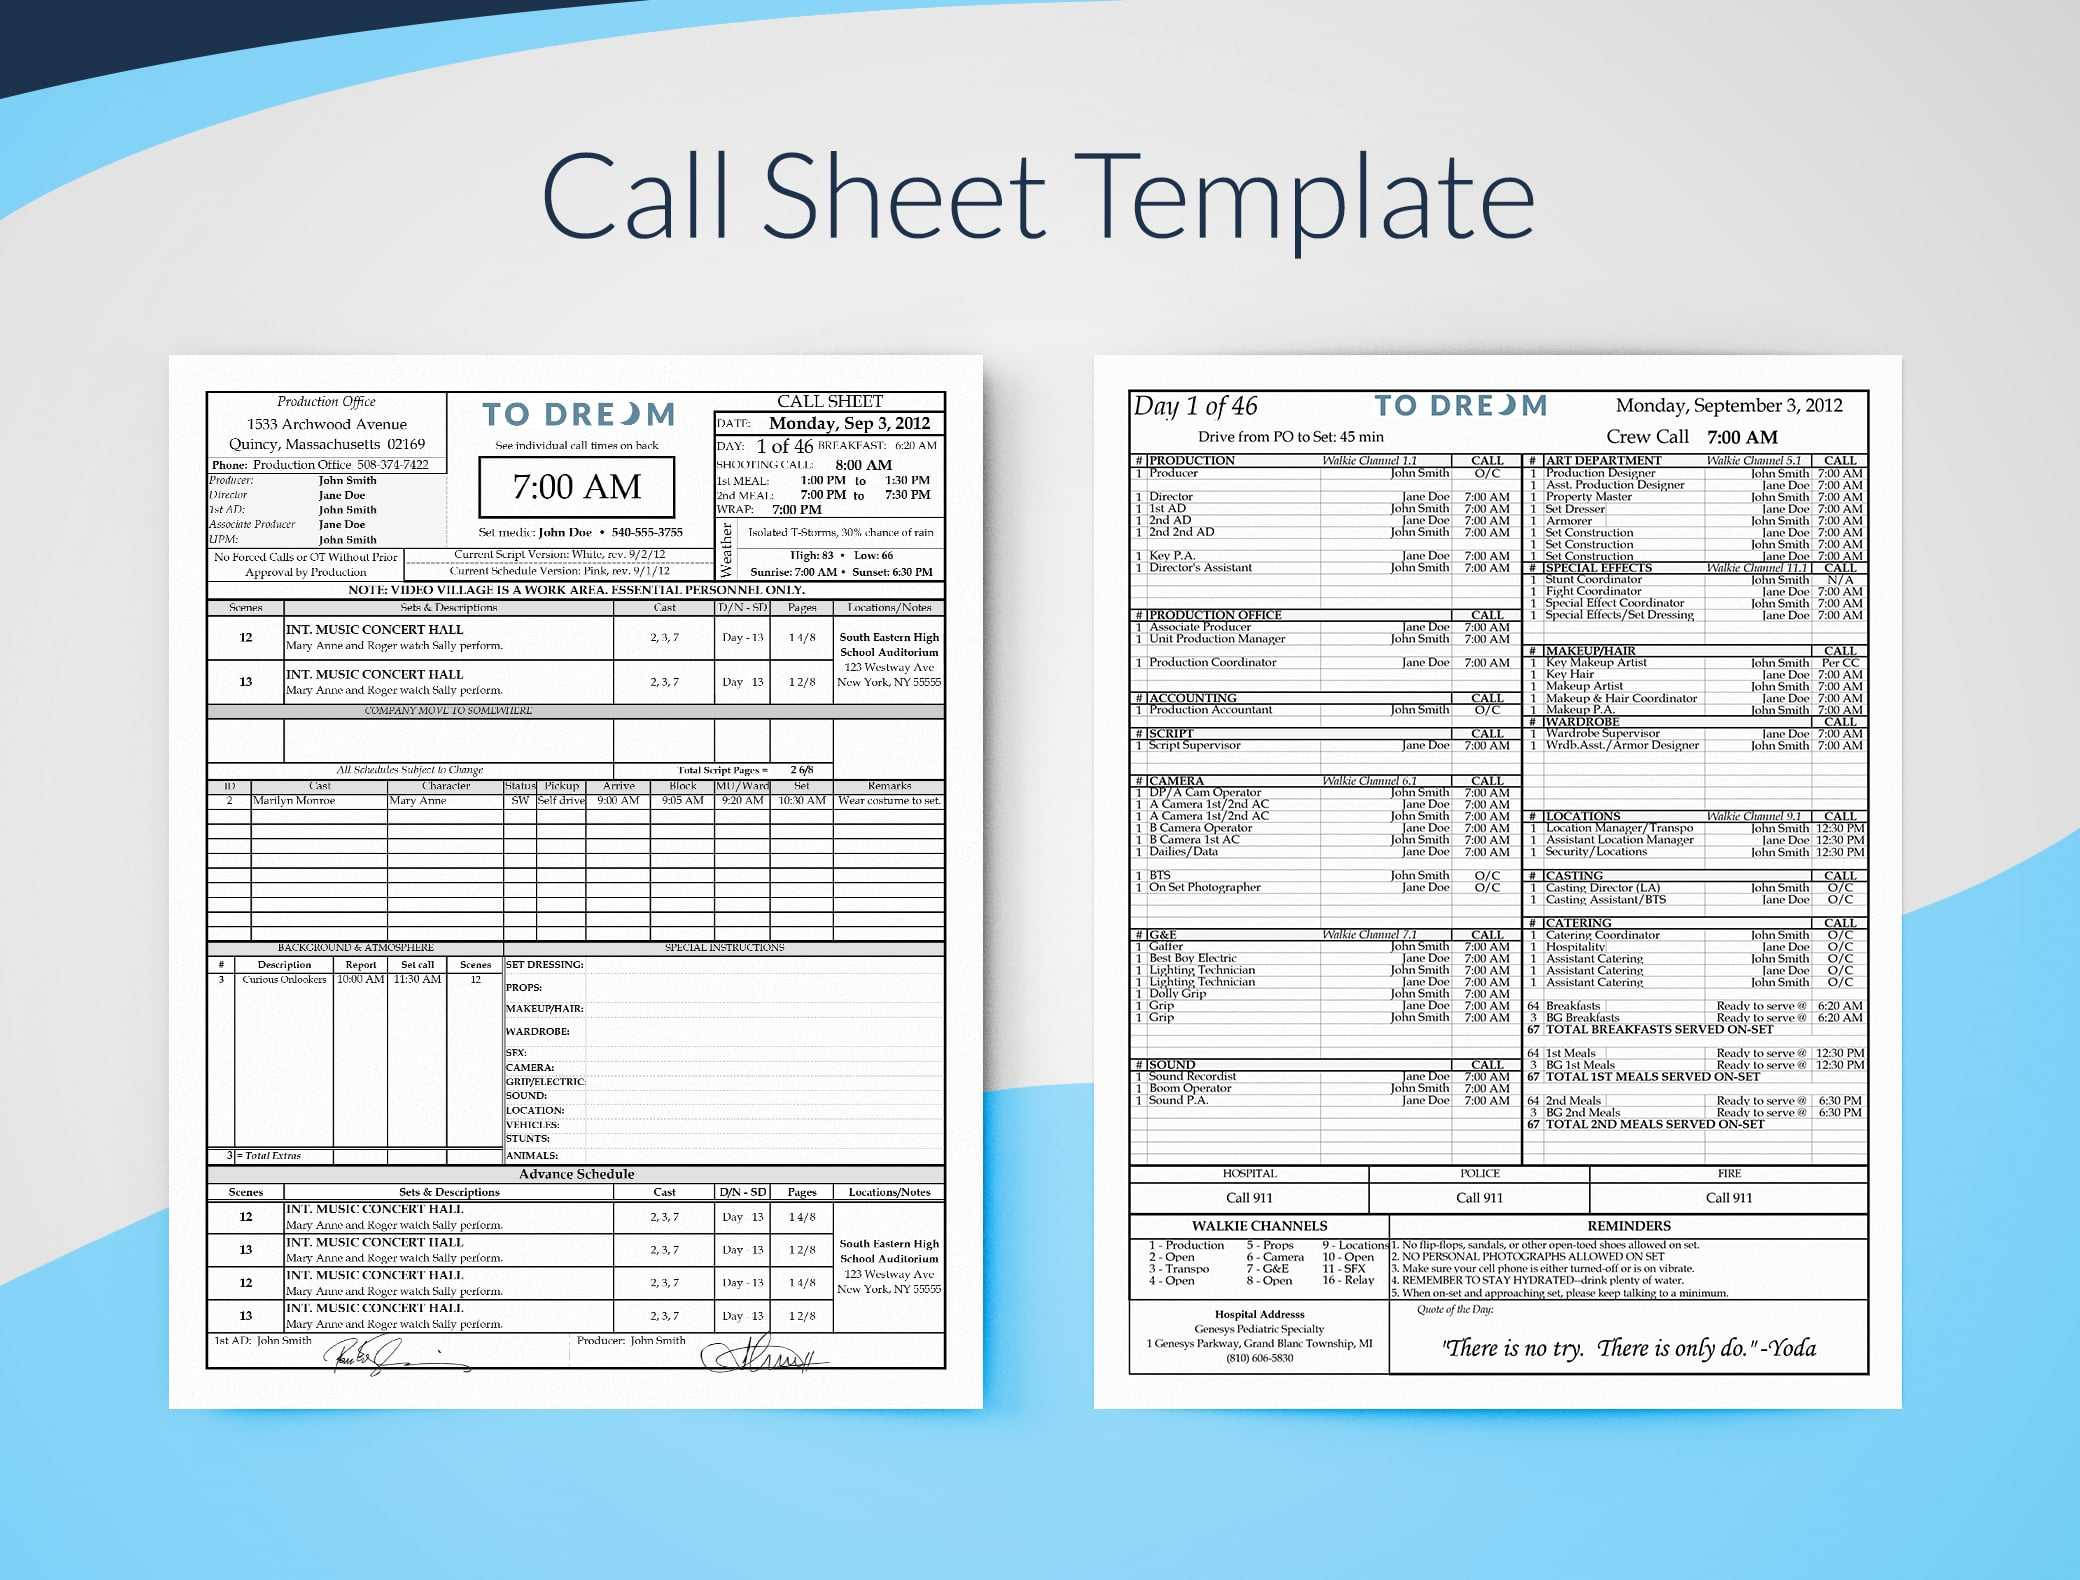 Call Sheet Template For Excel – Free Download | Sethero With Regard To Blank Call Sheet Template